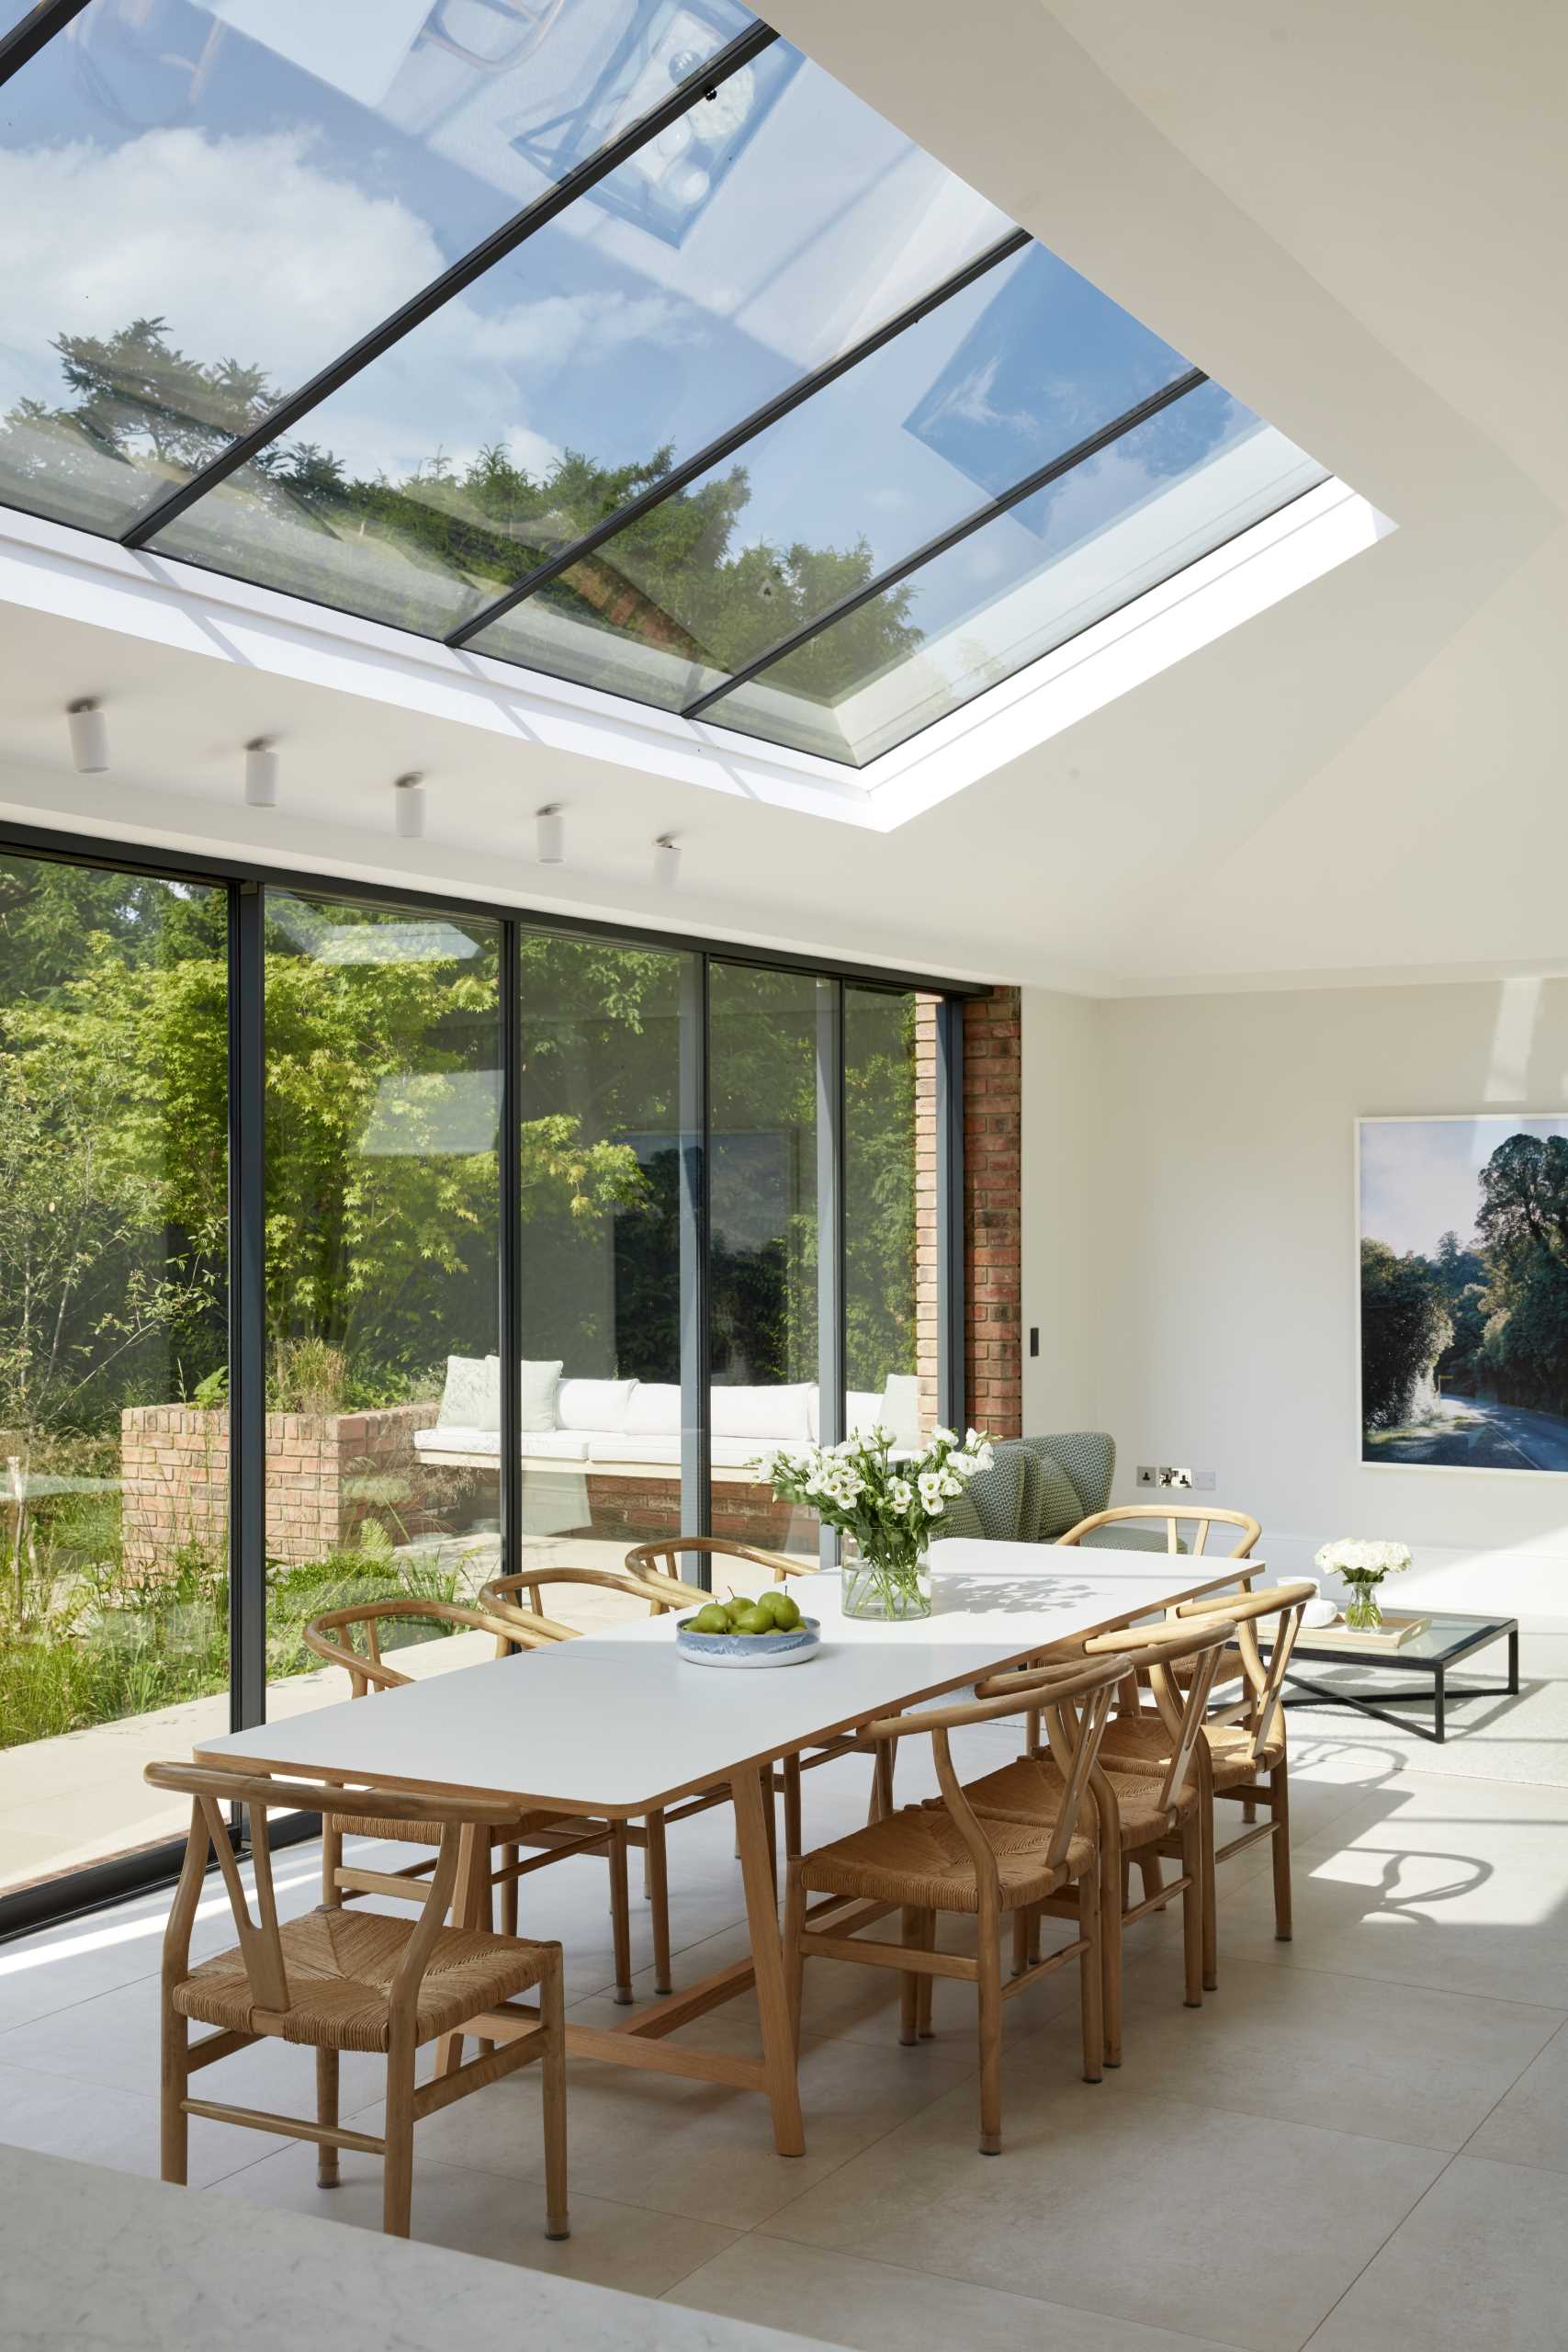 An updated brick extension for an Edwardian home includes a sitting area and dining area for eight people.